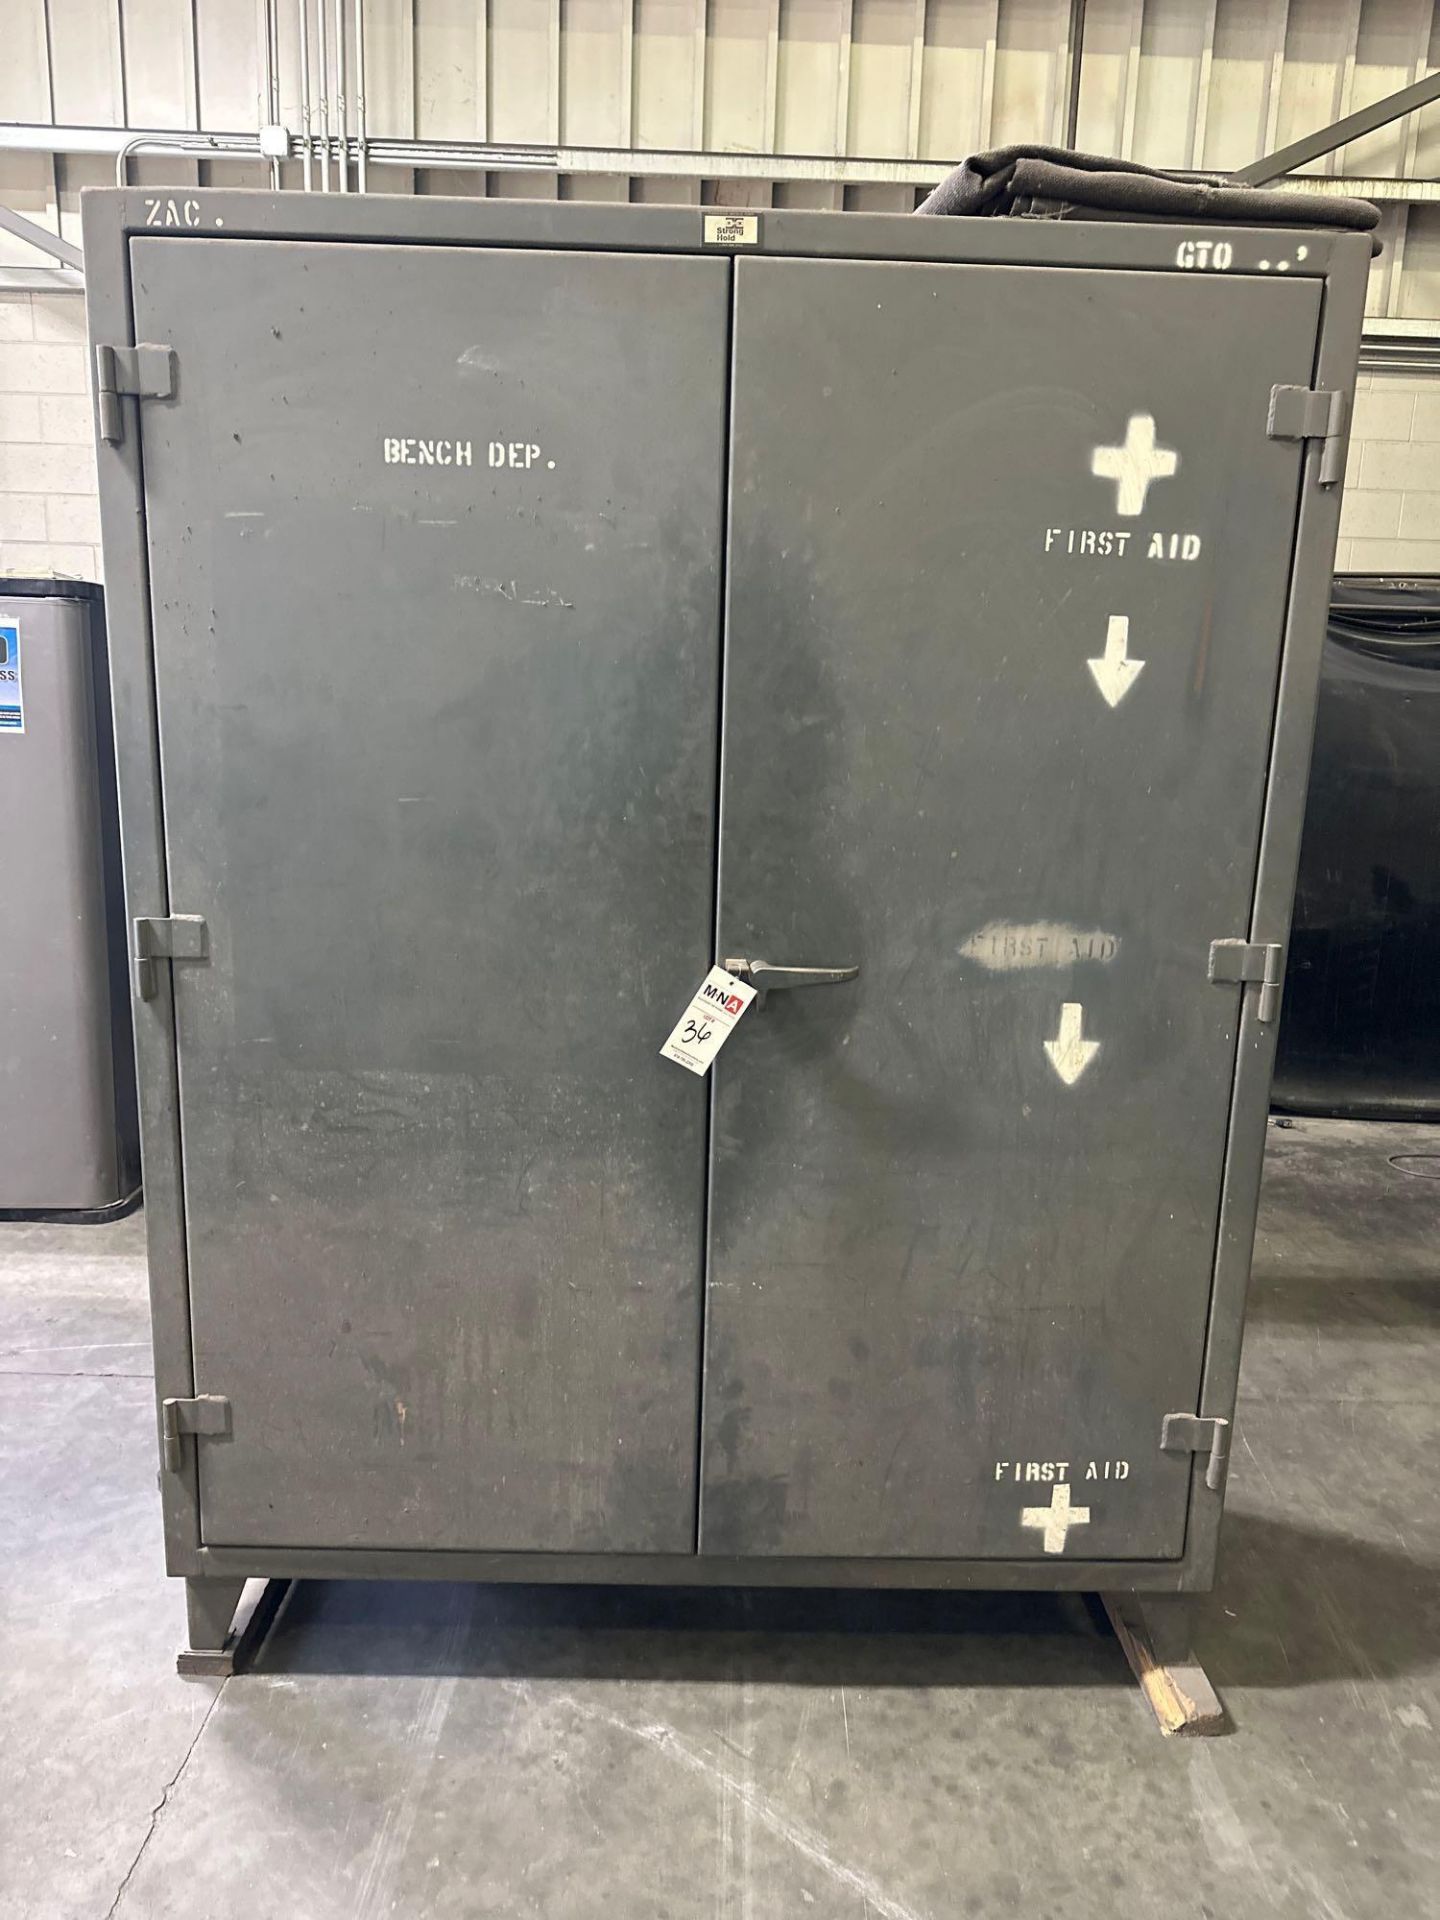 2 Door Steel Cabinet w/ Abrasive Sheets, Storehouse Tool Kit, Hooks, Hoses and Nails